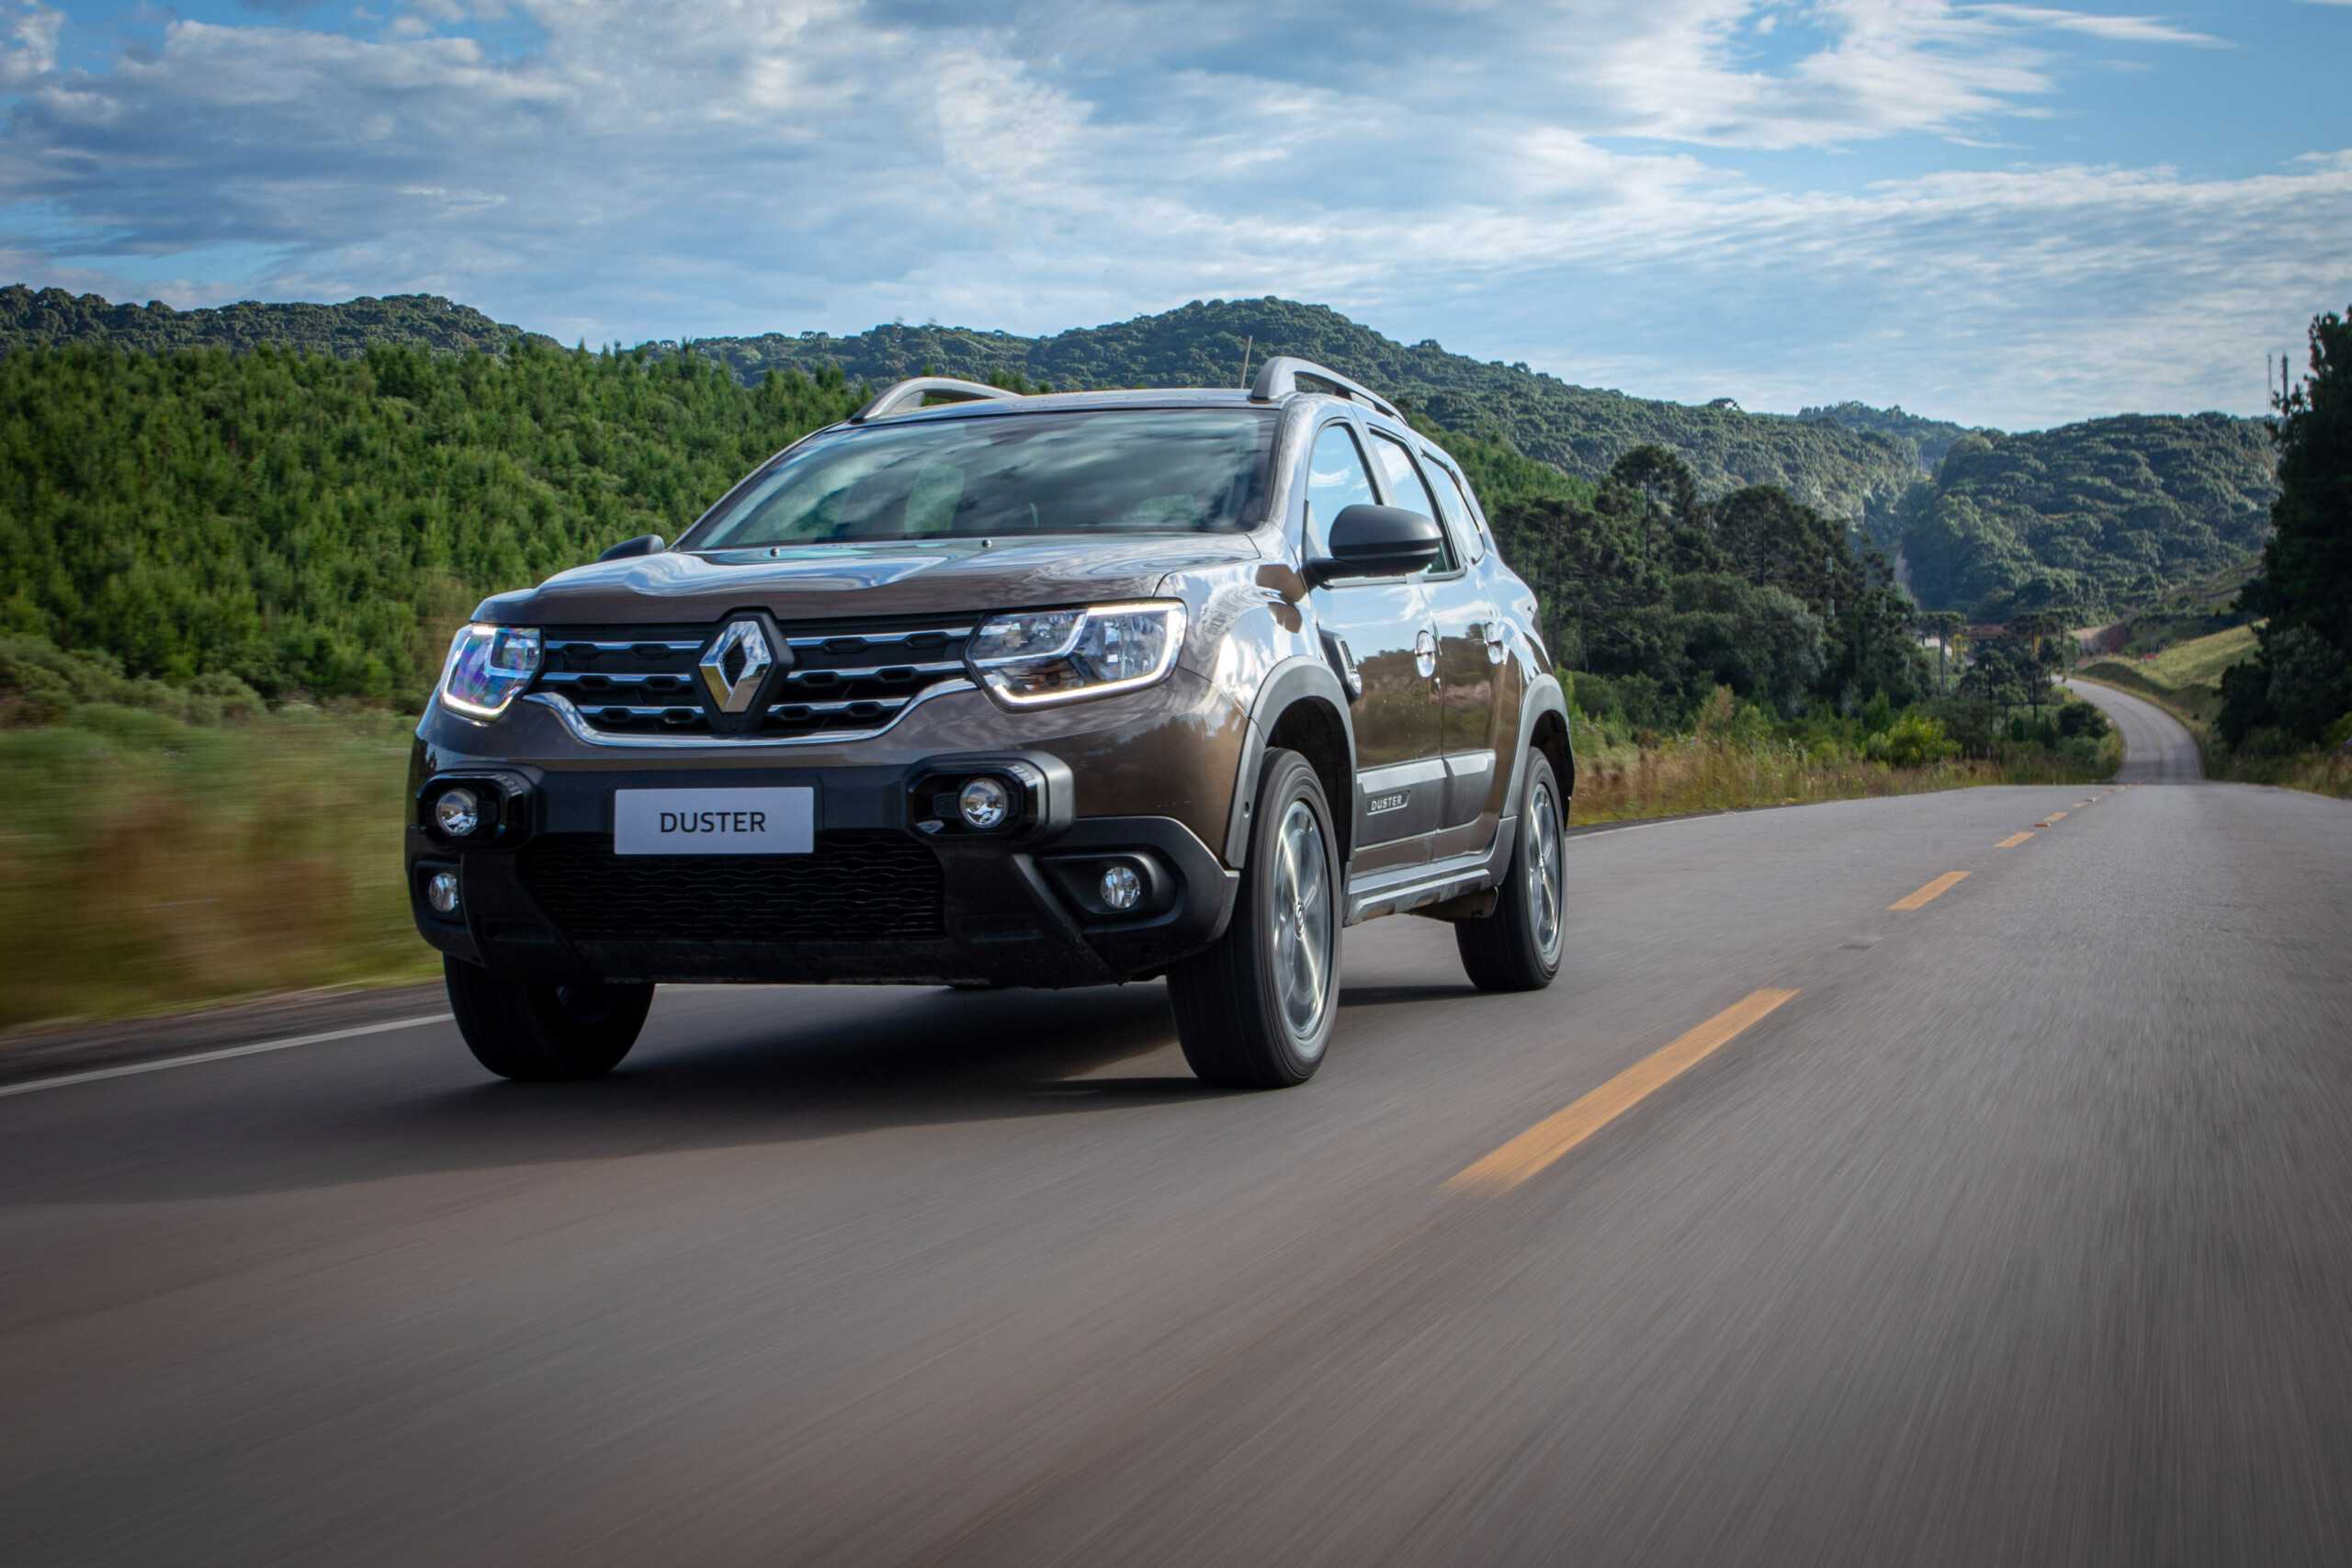 Рено дастер 2021 2.0. Renault Duster 2021. Новый Рено Дастер 2021. Новый Renault Duster. Renault Duster 2.